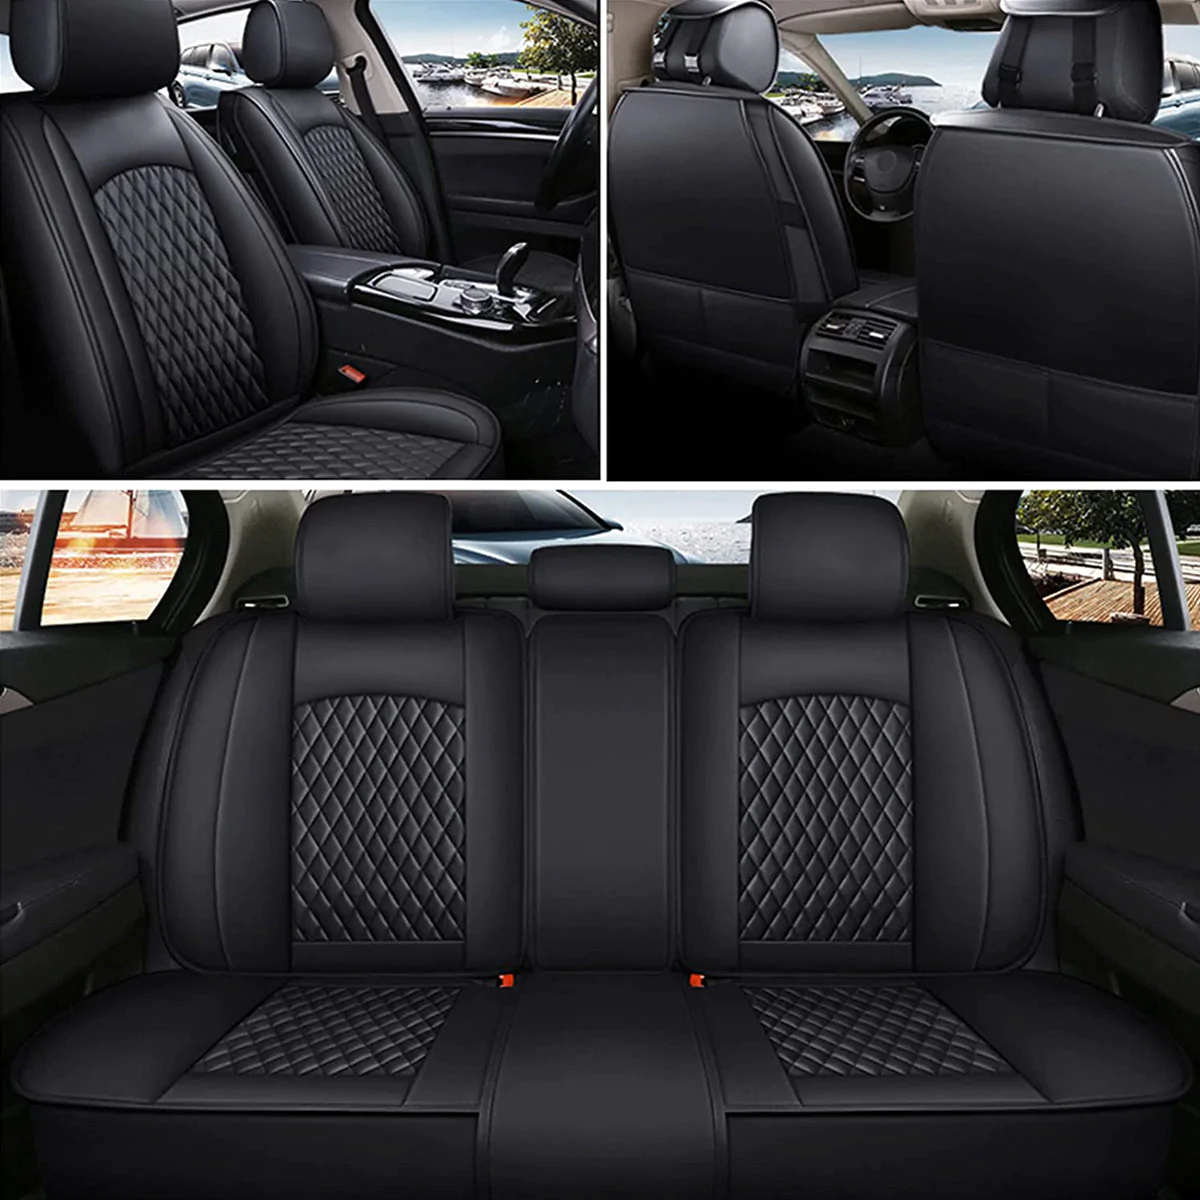 Custom Text For Seat Covers 5 Seats Full Set, Custom Fit For Your Cars, Leatherette Automotive Seat Cushion Protector Universal Fit, Vehicle Auto Interior Decor HA13988